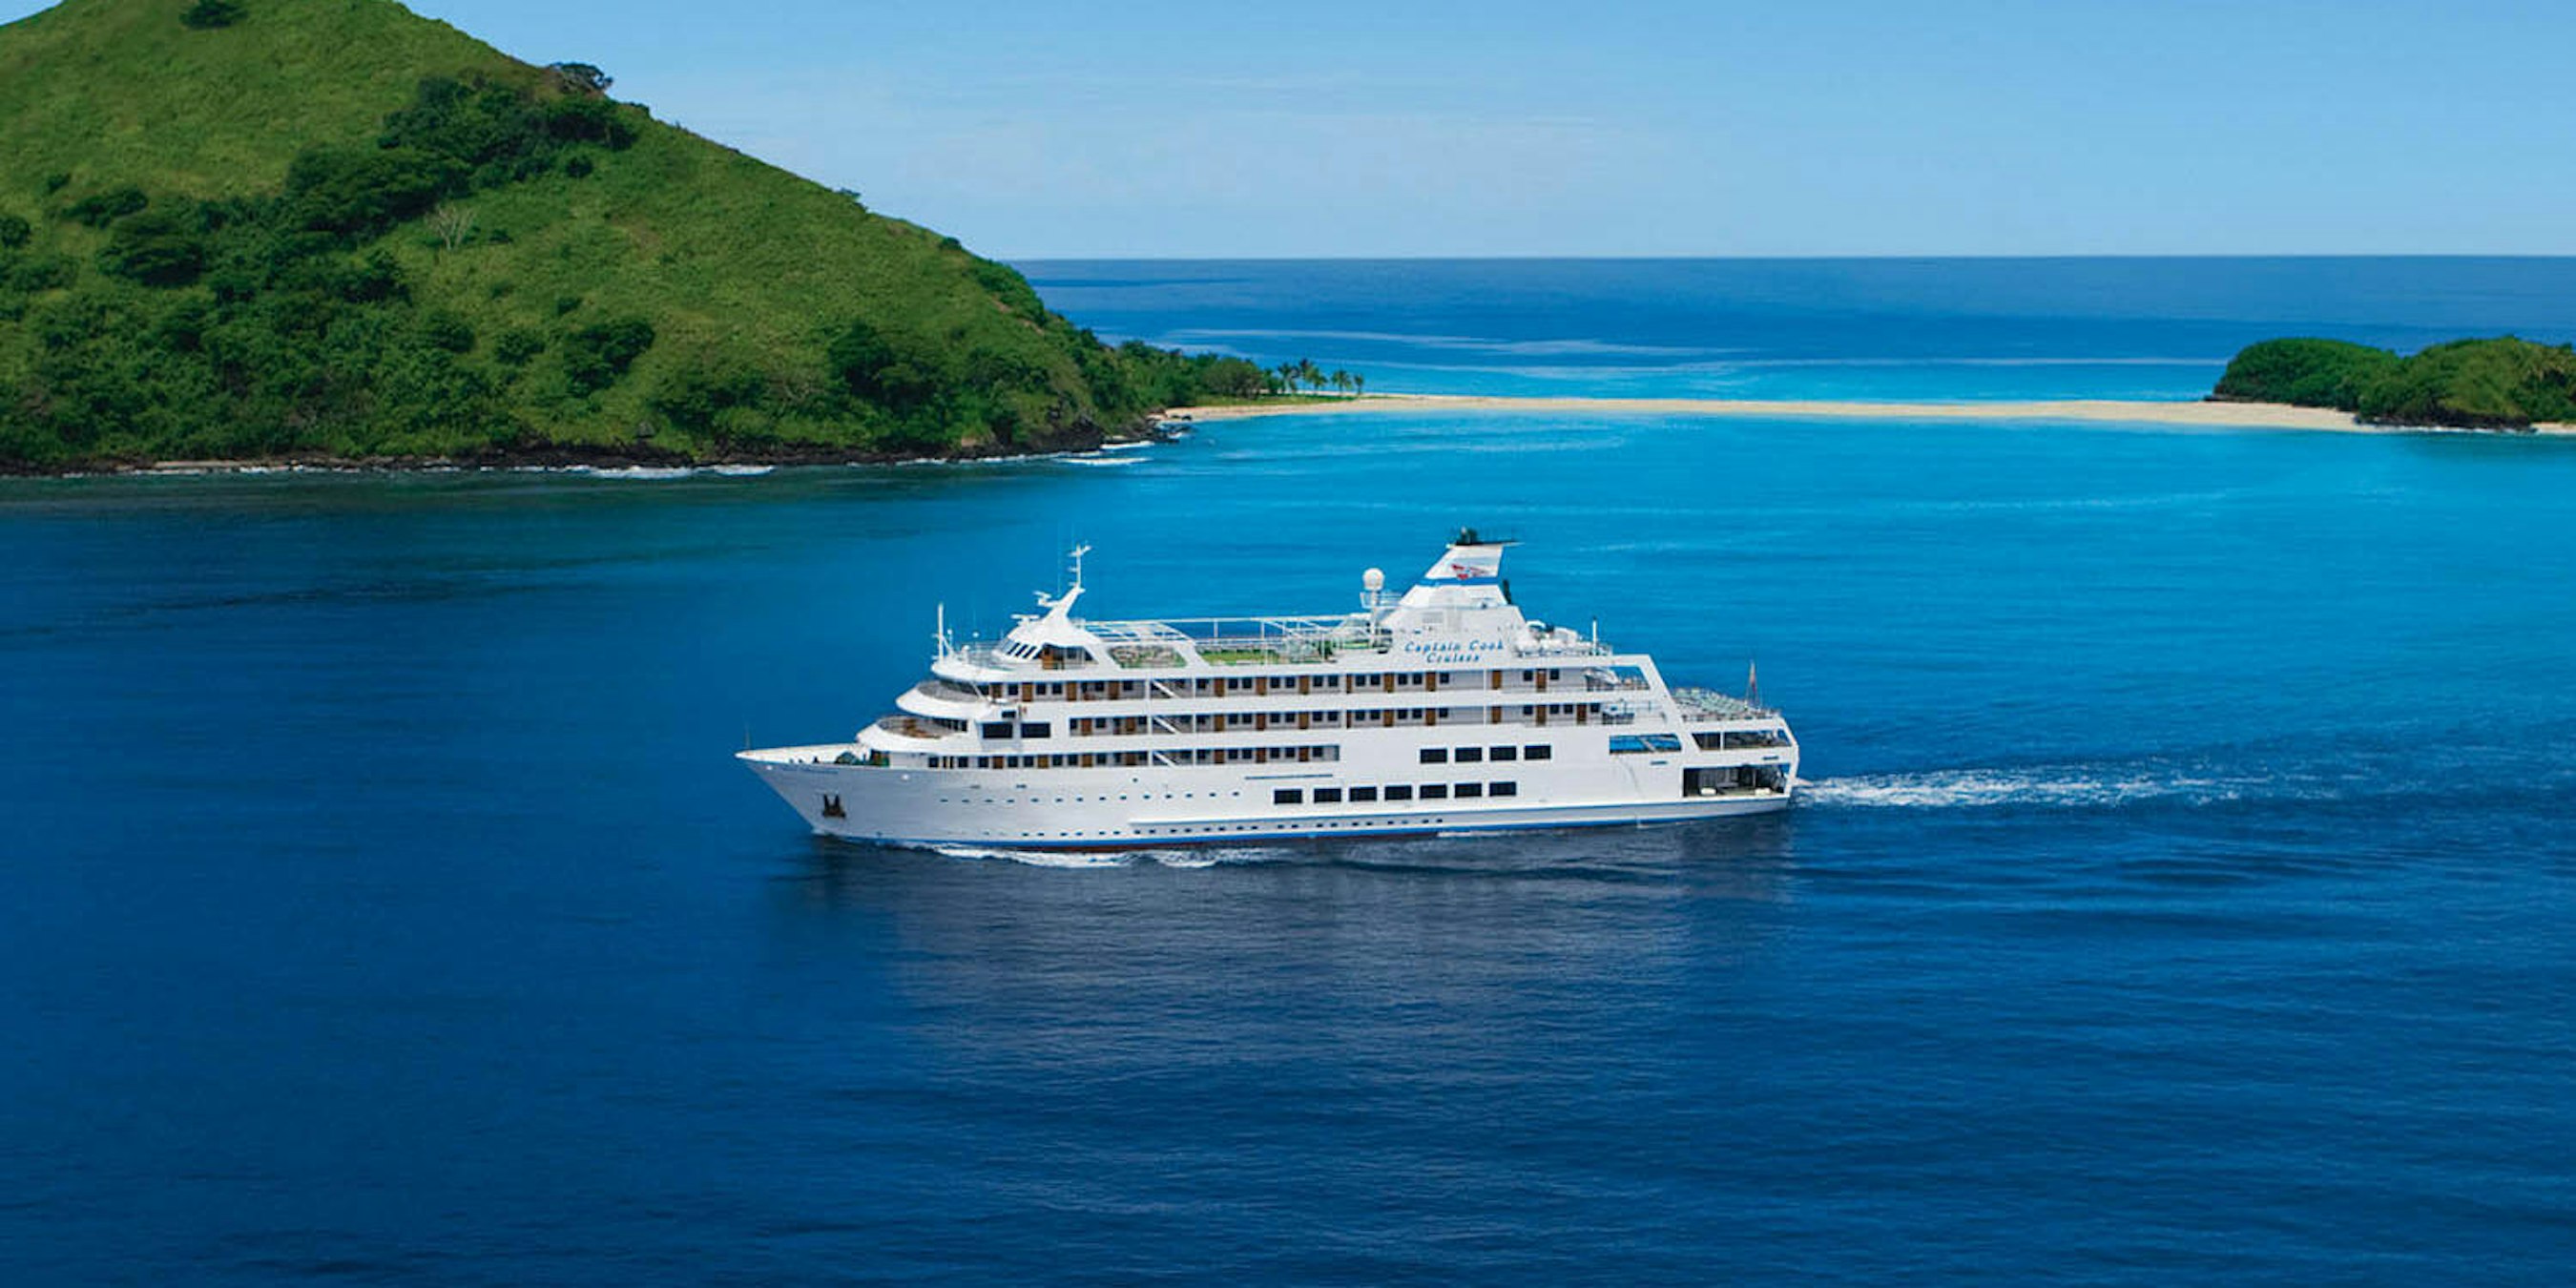 family cruises south pacific